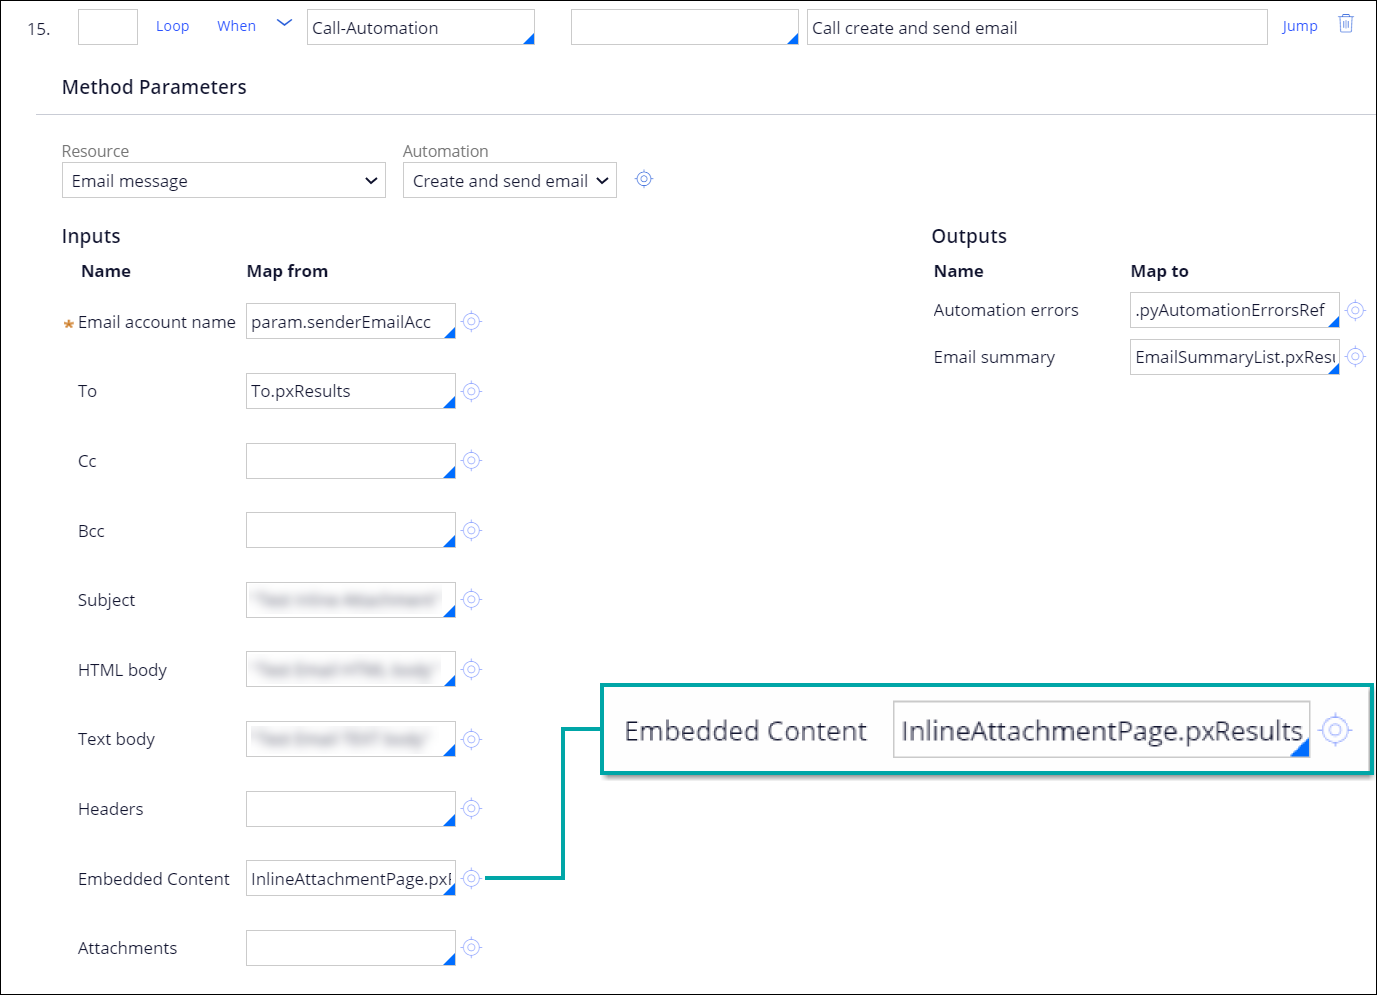 The Call-Automation step, with a configured activity to place the content in the Attachments section or in the email body.